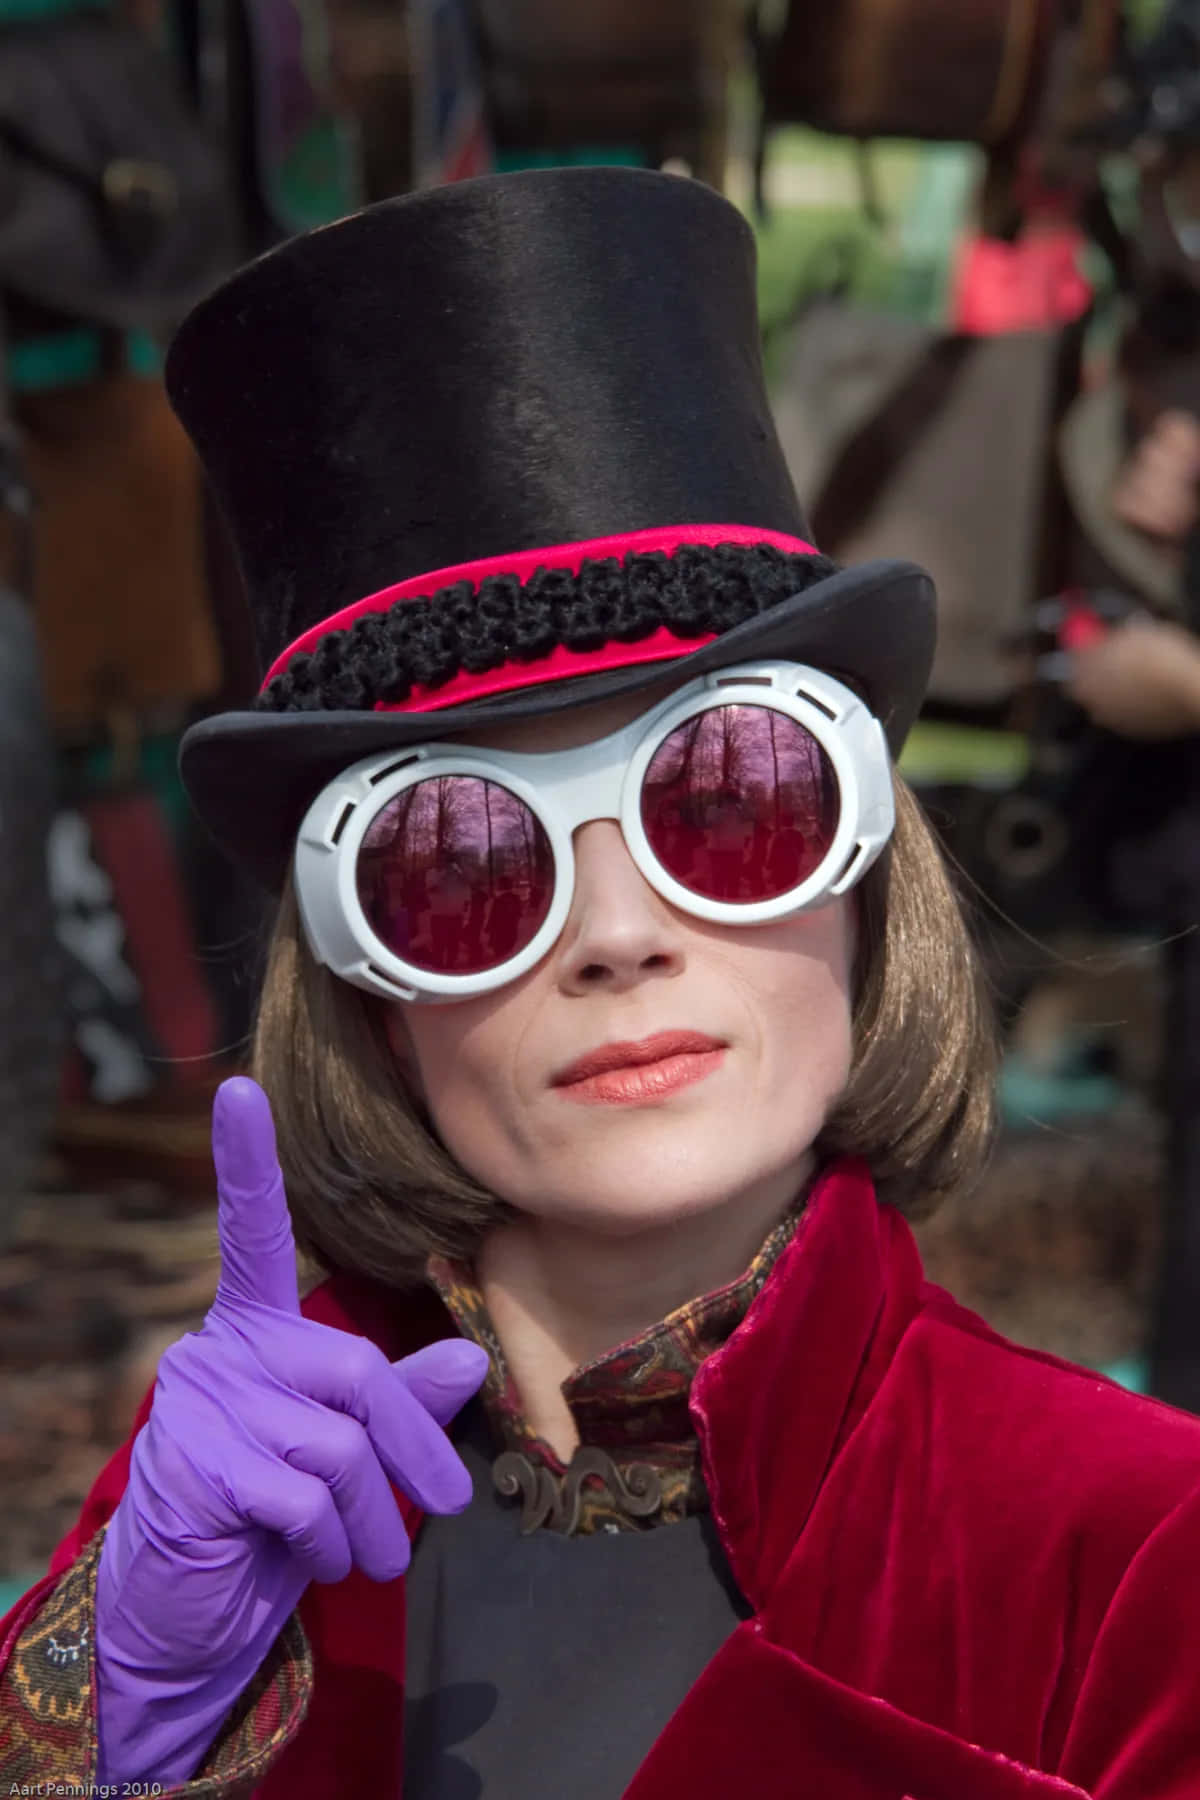 Come join the chocolate factory tour with Willy Wonka!